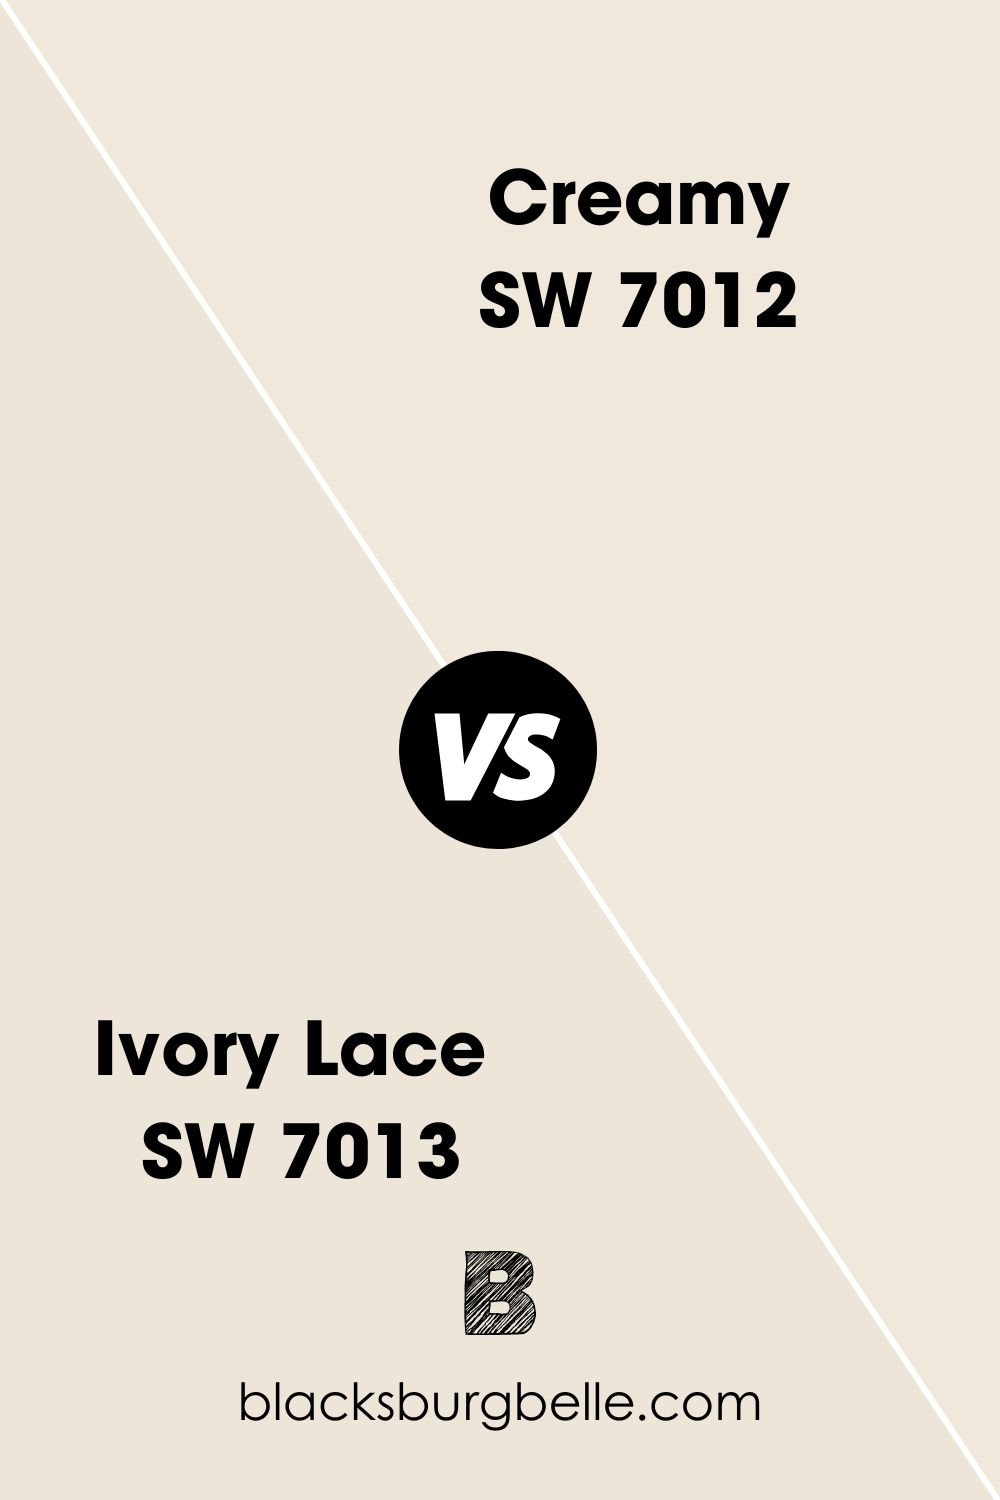 Sherwin Williams Ivory Lace SW 7013